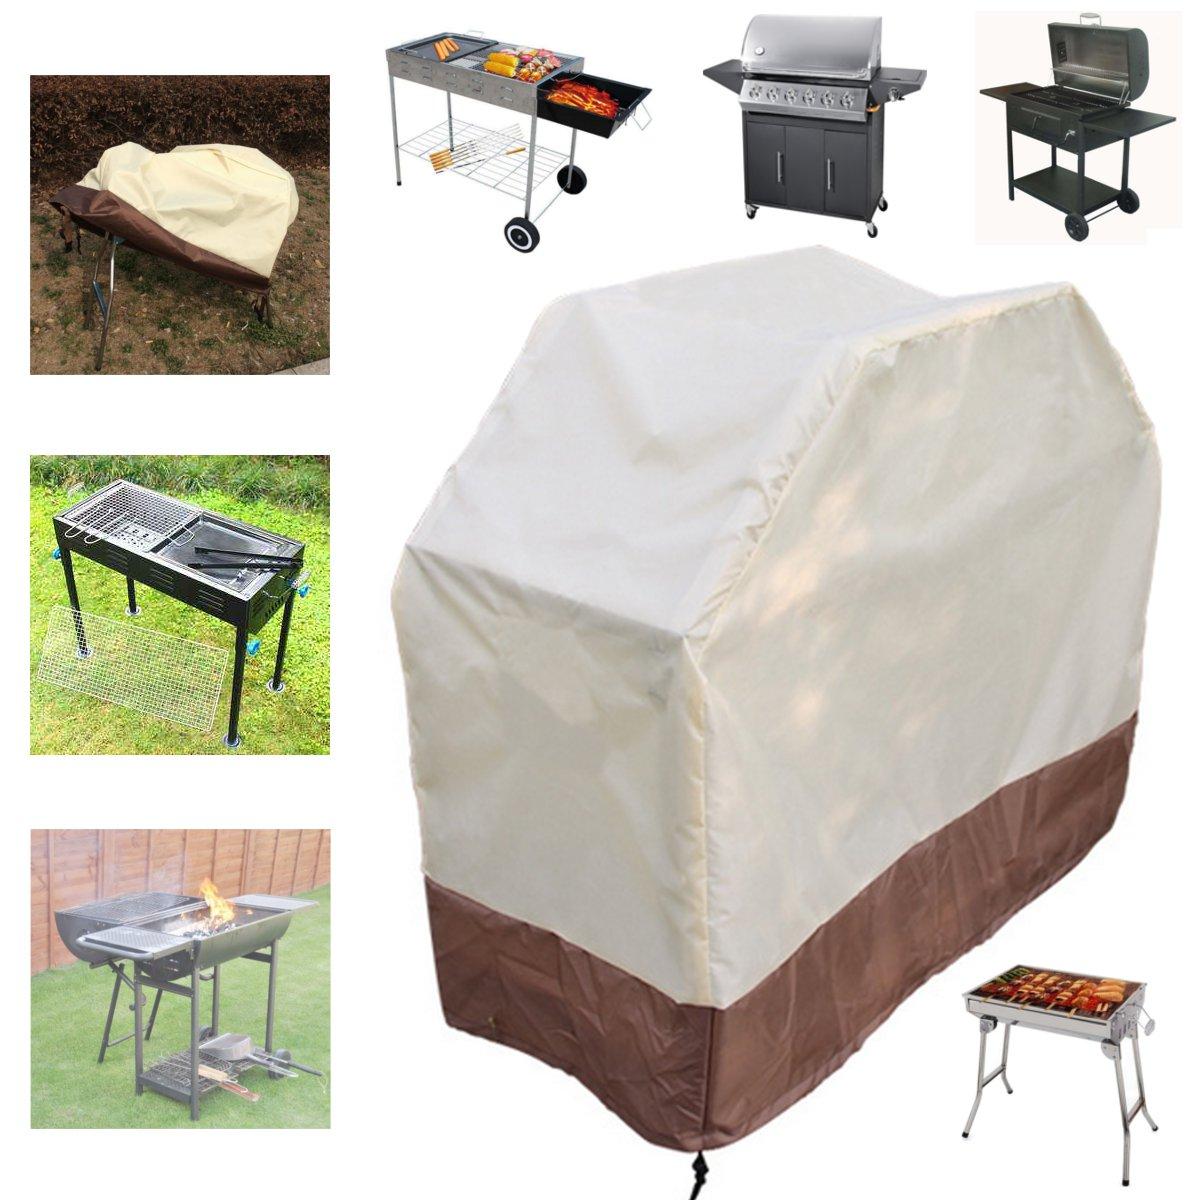 180x56x110cm BBQ Grill Gas Barbecue Waterproof Covers Garden Outdoor Cooking Rain Protector